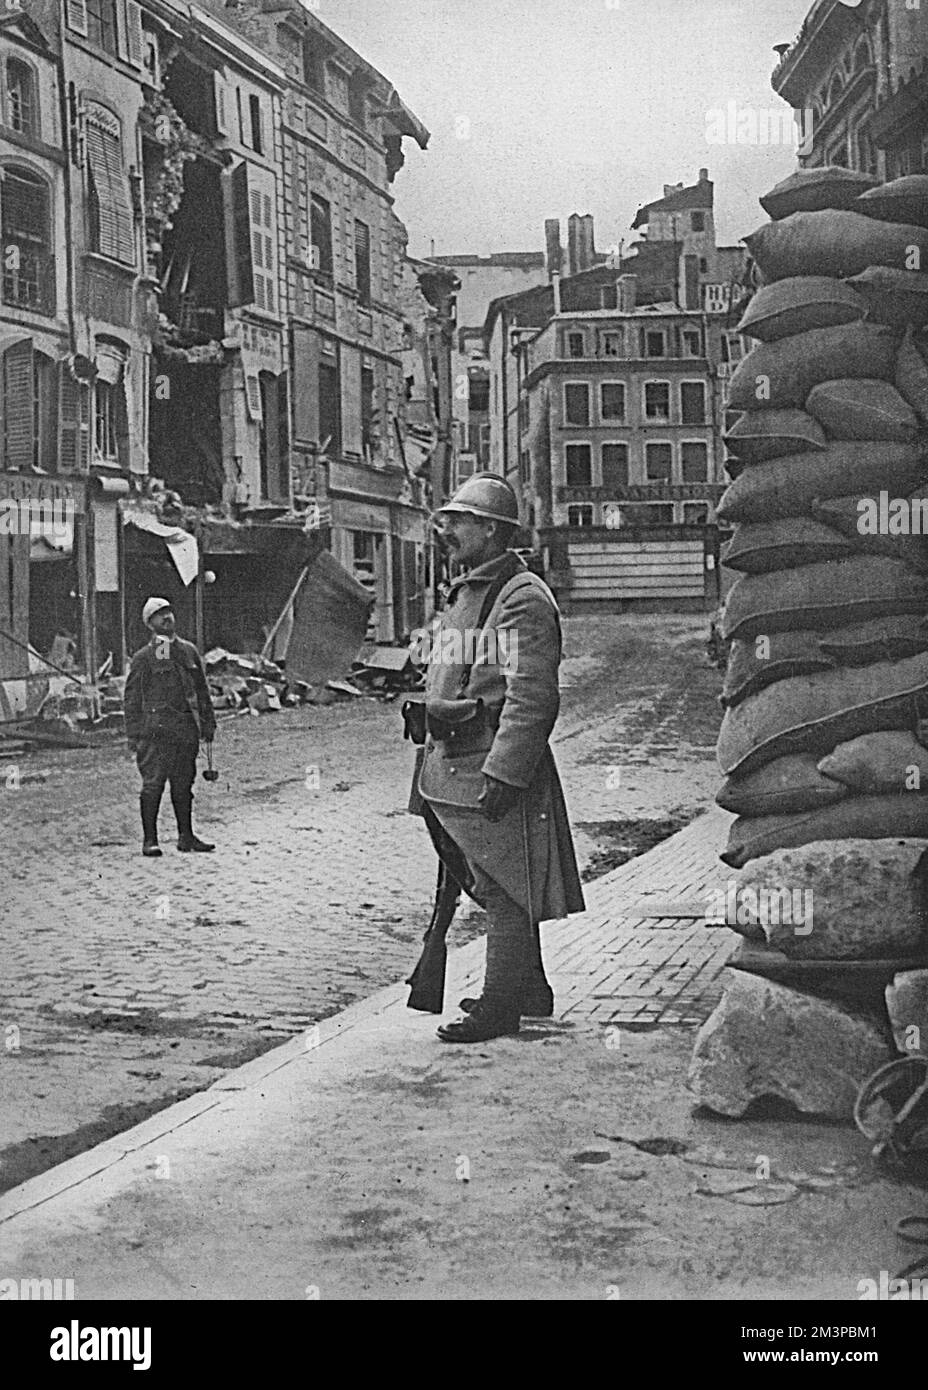 Appearance of the town of Verdun after a heavy bombardment by German guns in 1916 in order to force French positions.  The town was evacuated by civilians, deserted by all but its garrison of soldiers and firemen.  As can be seen, many of the buildings were sandbagged at their base.     Date: 1916 Stock Photo